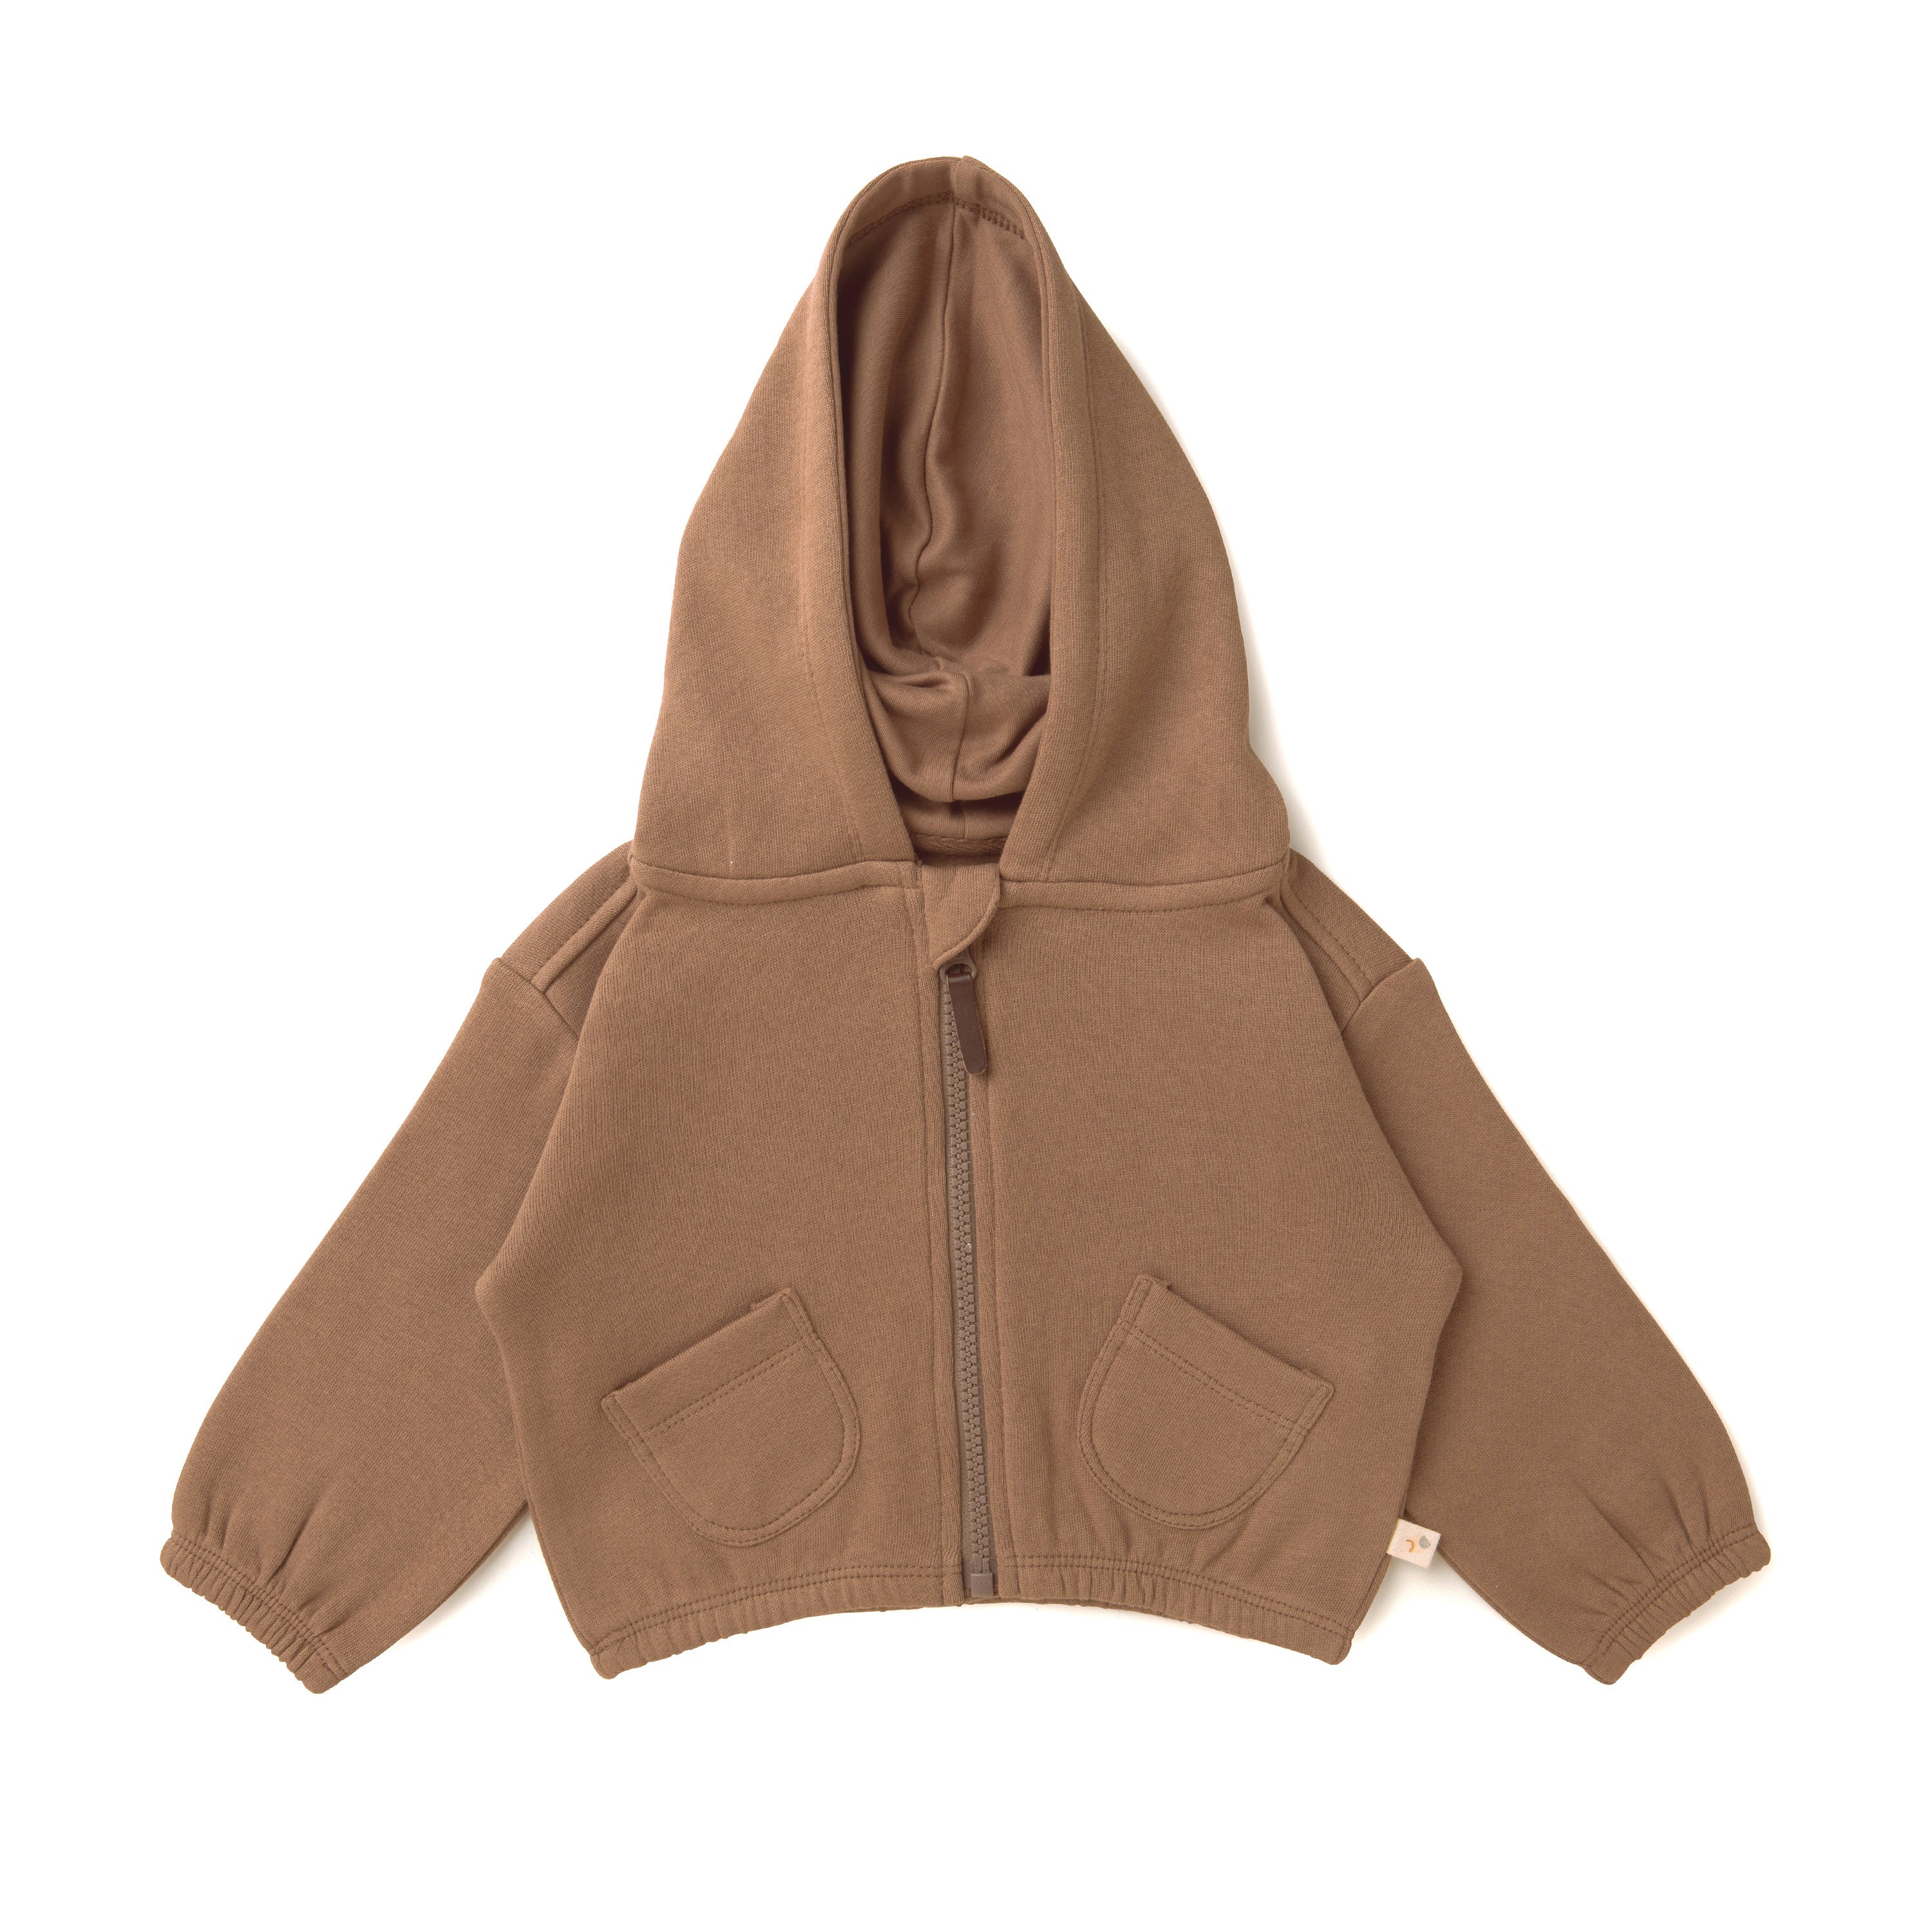 A brown zip-up hoodie with a large hood and two front pockets from Organic Baby, displayed flat against a white background.